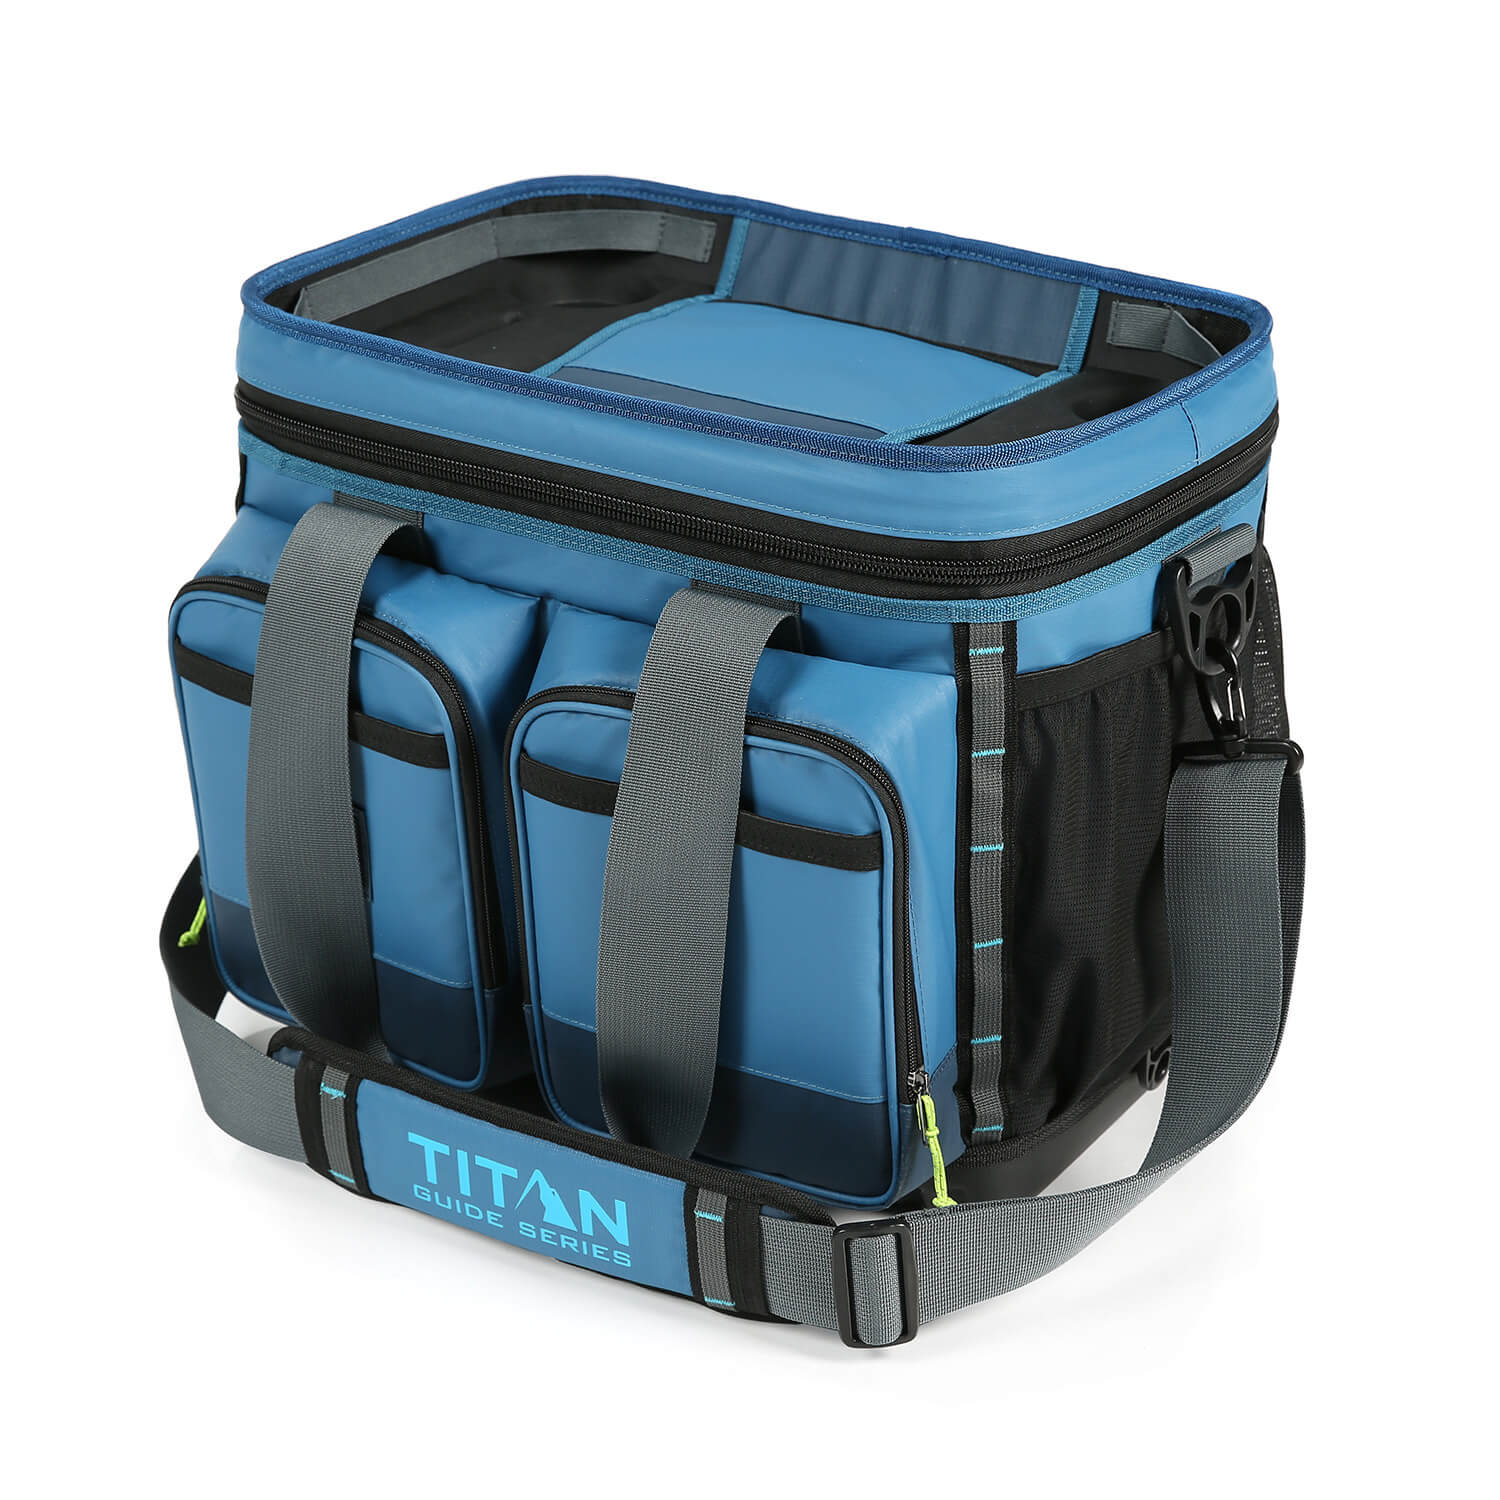 Titan by Arctic Zone™ Guide Series 36 Can Cooler | Arctic Zone